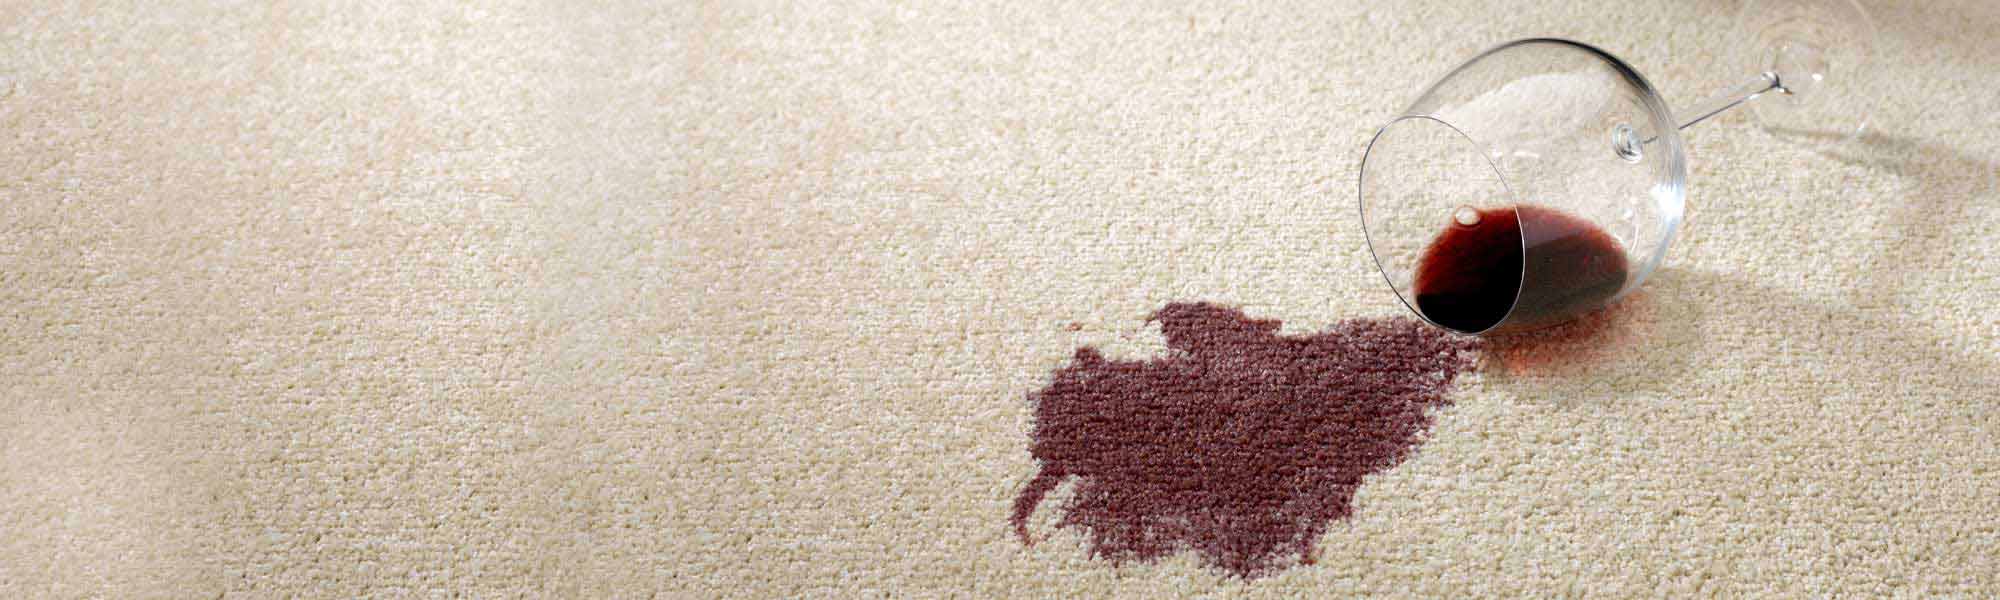 Professional Stain Removal Service by Viking Chem-Dry